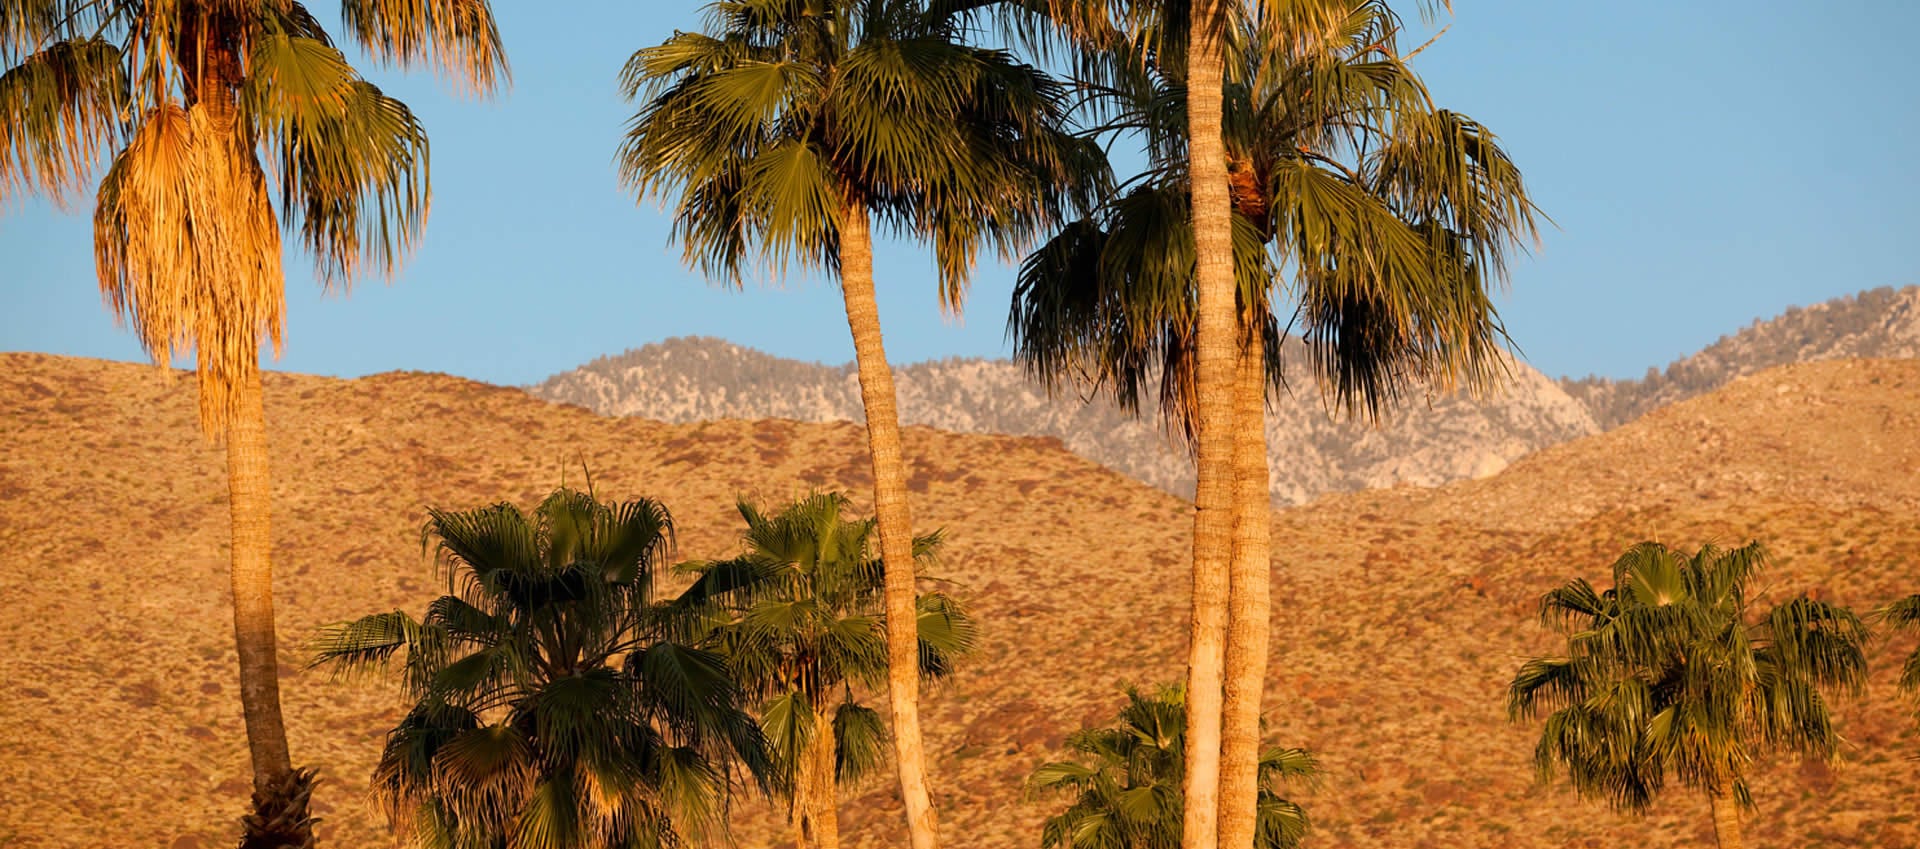 Palm Springs area hills with palm trees